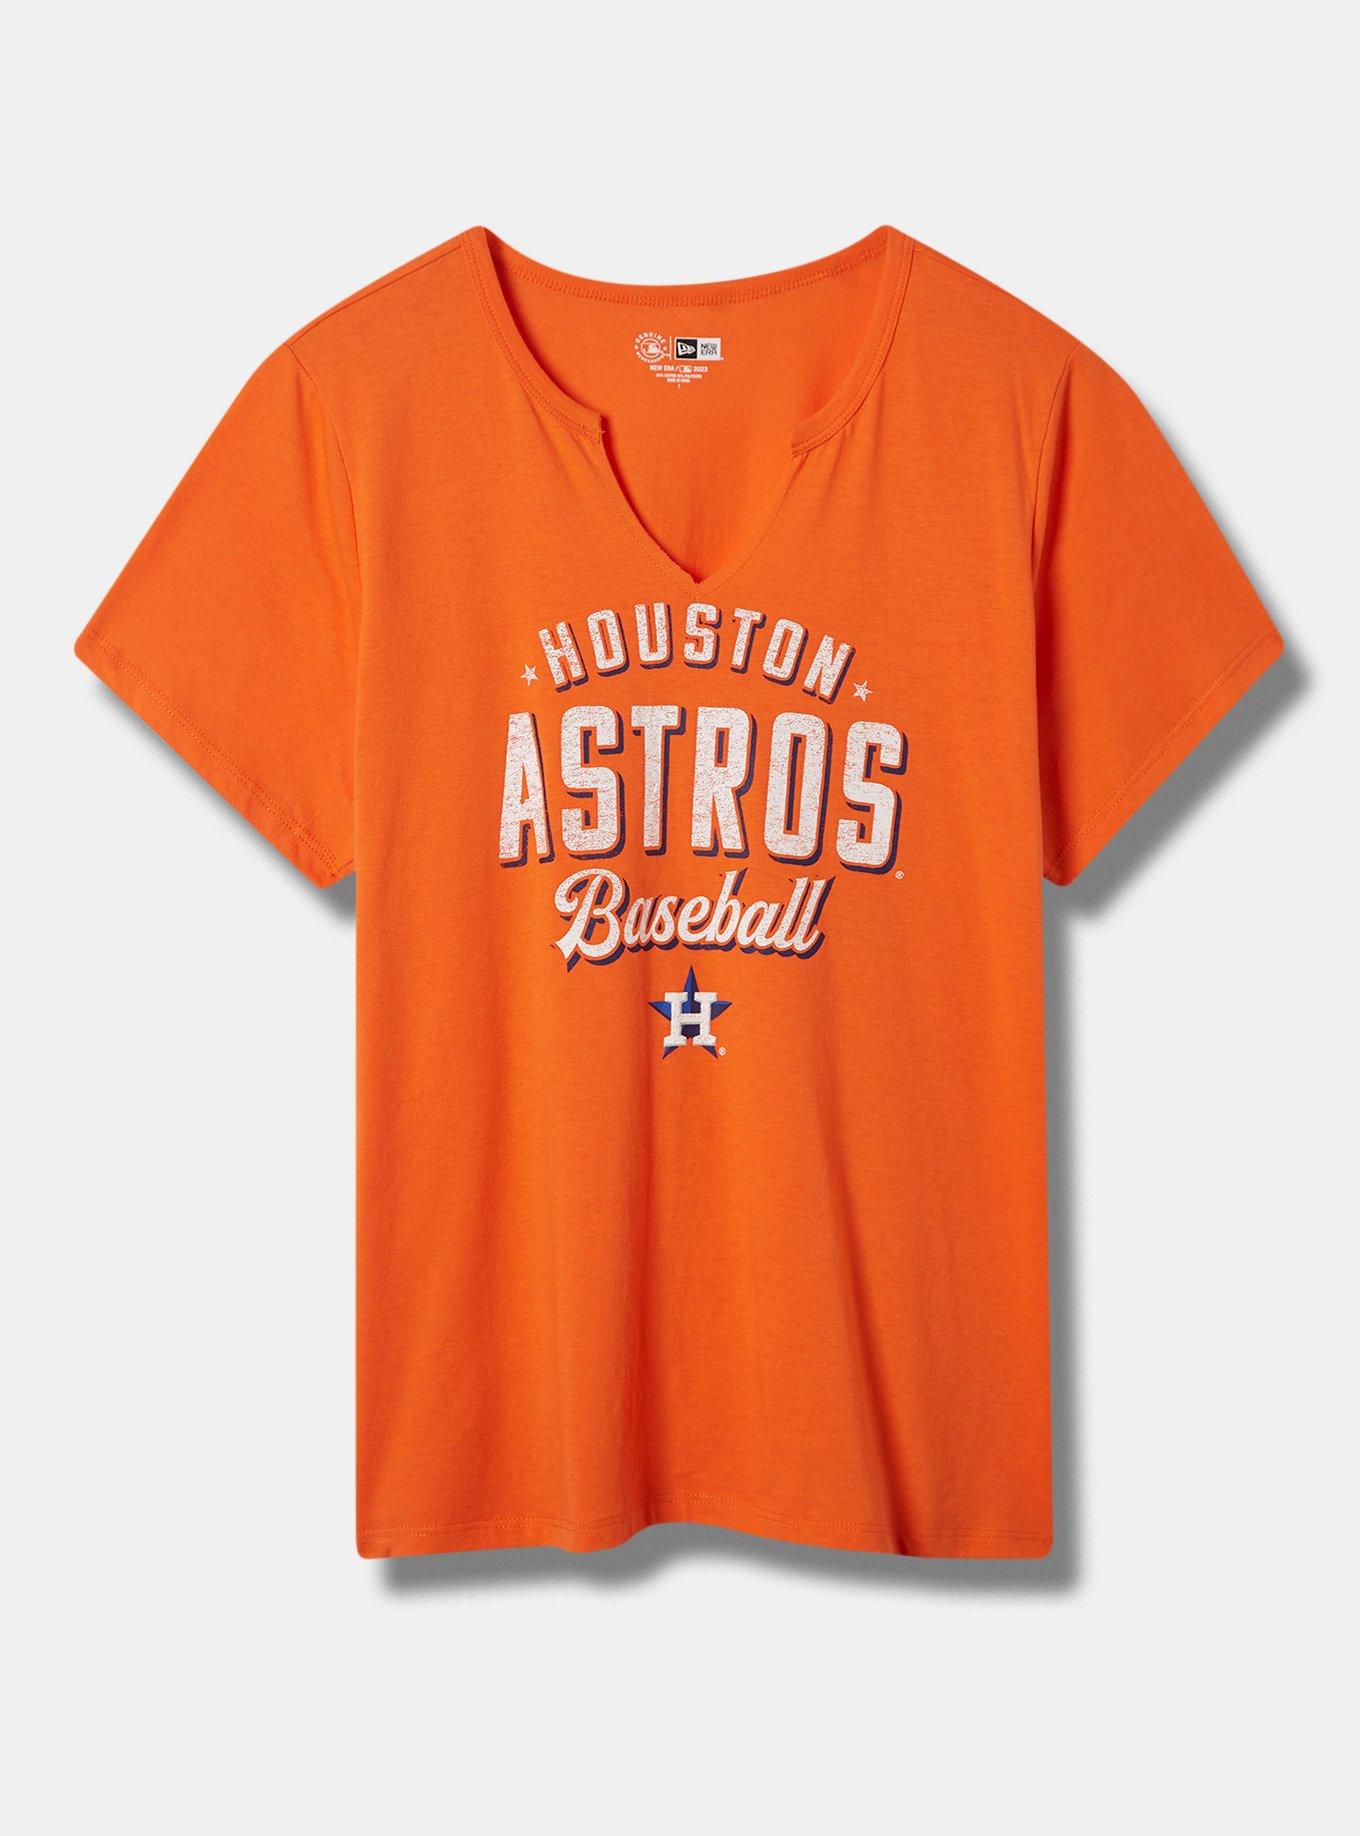 Houston Astros Breast Cancer fight like an Astro shirt, hoodie